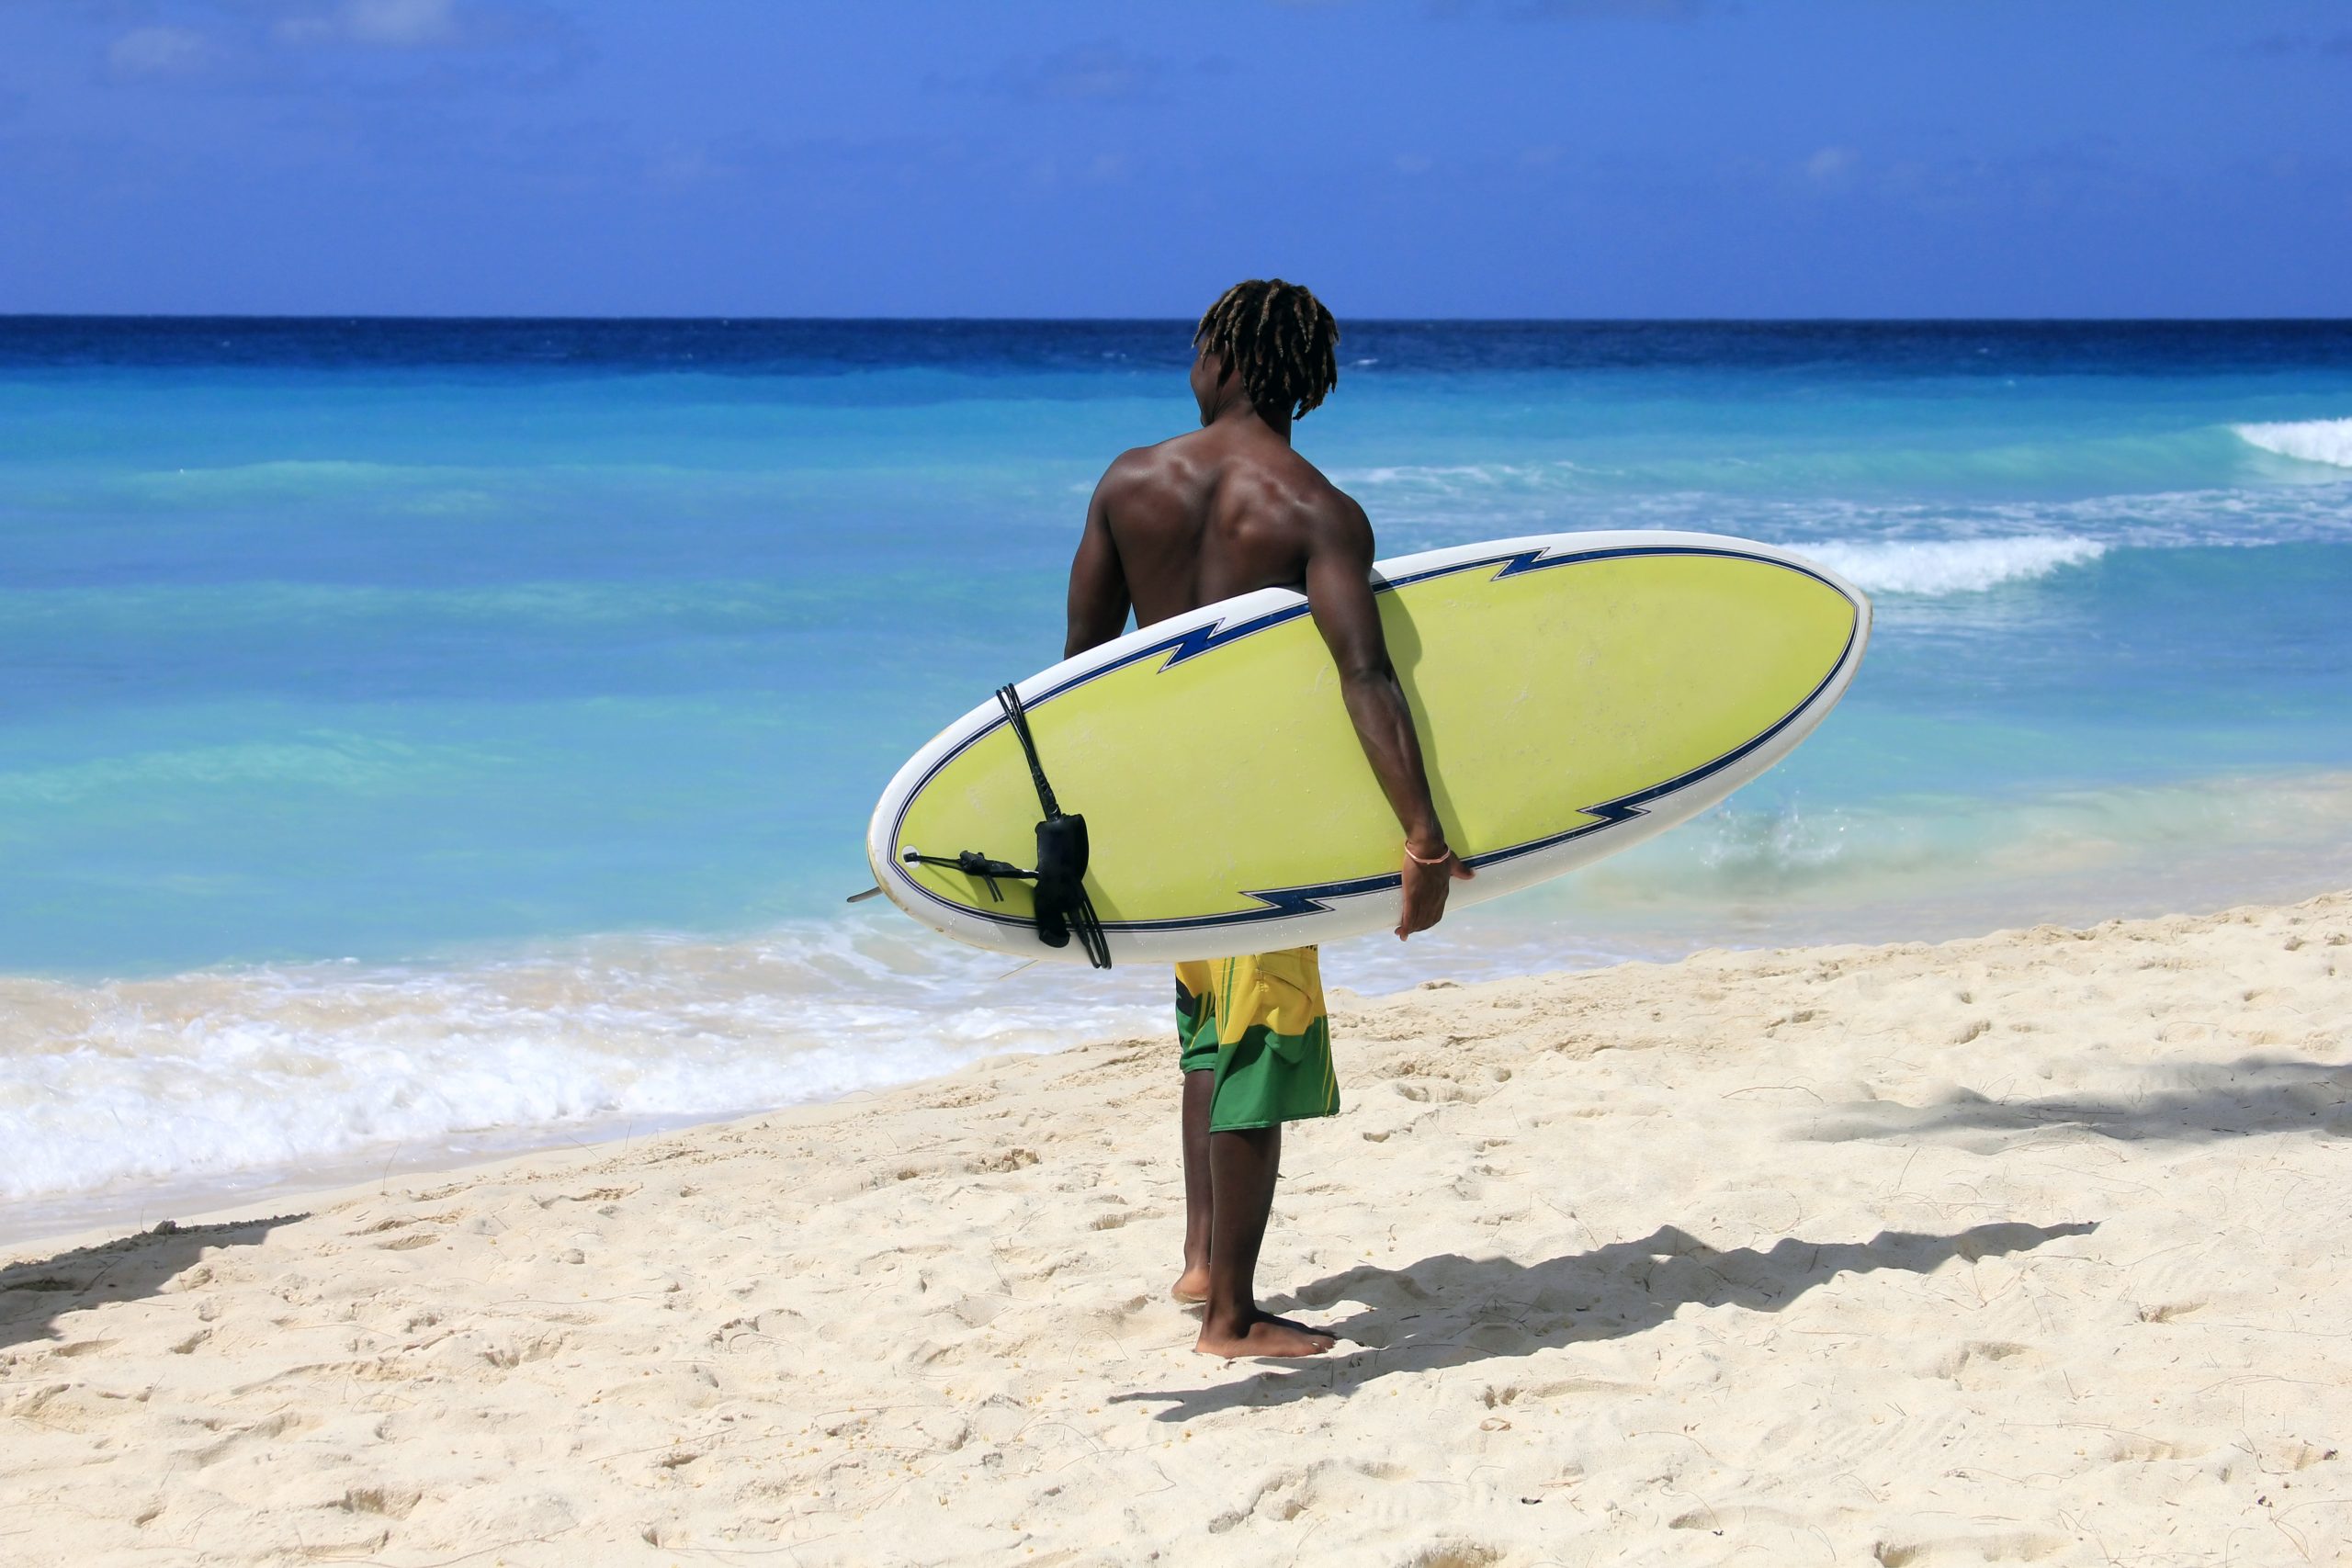 The Best Popular Caribbean Countries for Surfing